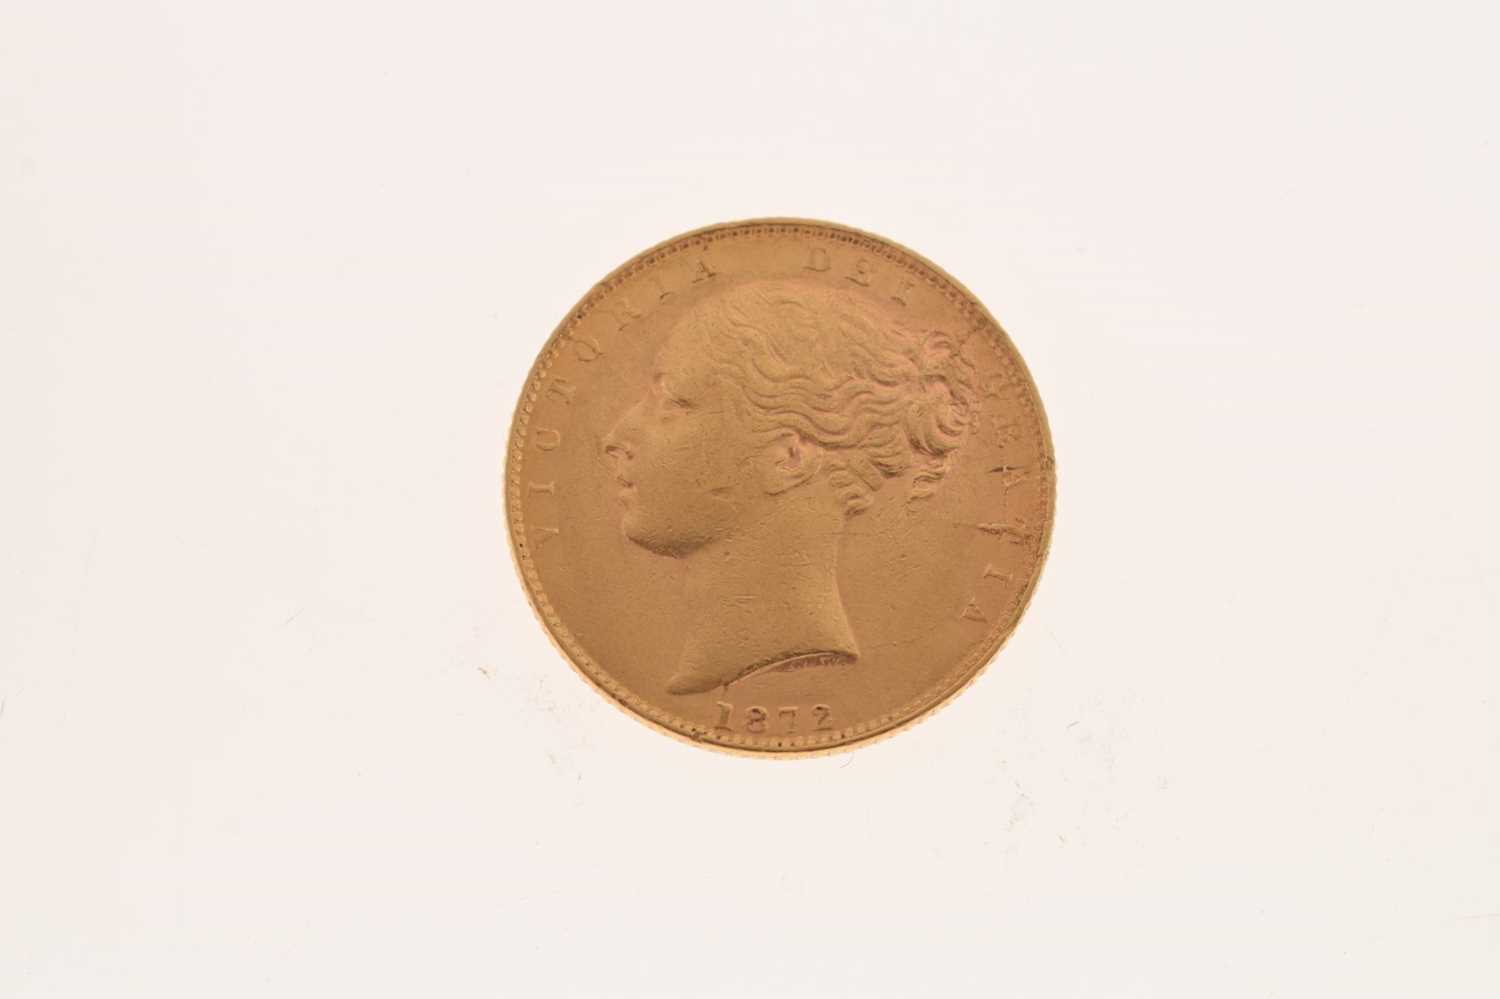 Queen Victoria young head gold sovereign, 1872 - Image 4 of 4